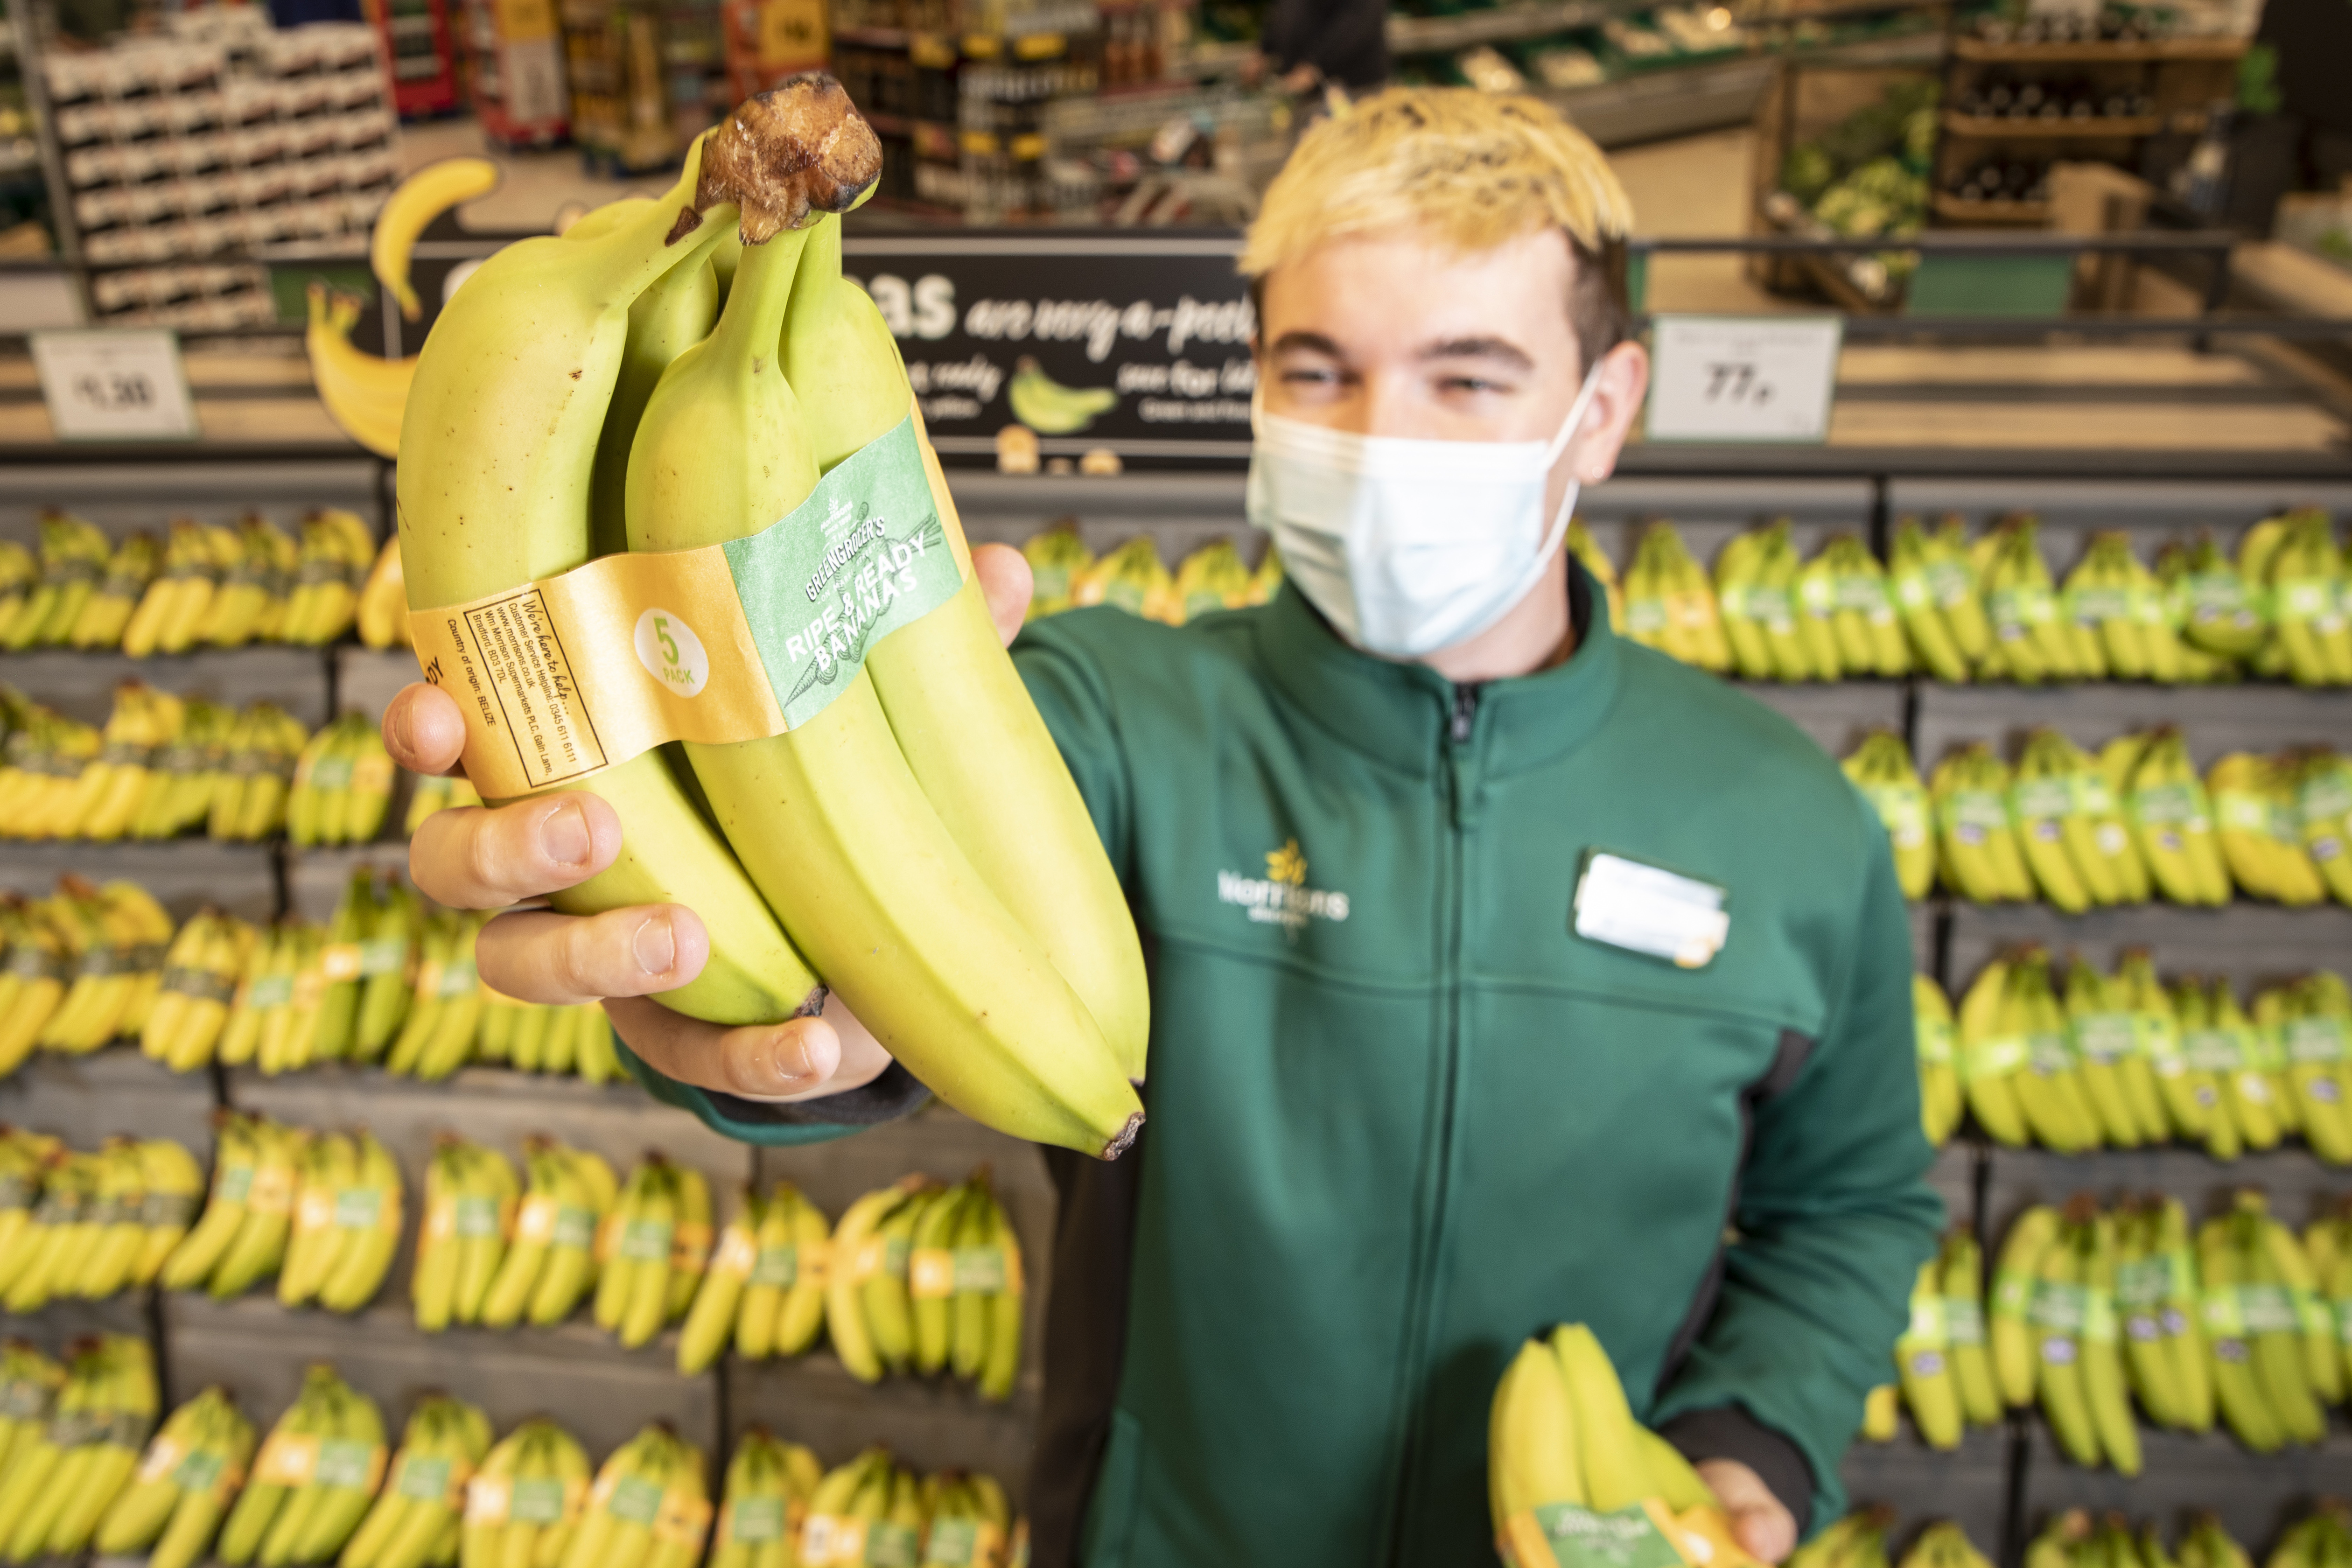 Morrisons first supermarket to ban plastic packaging from all bananas